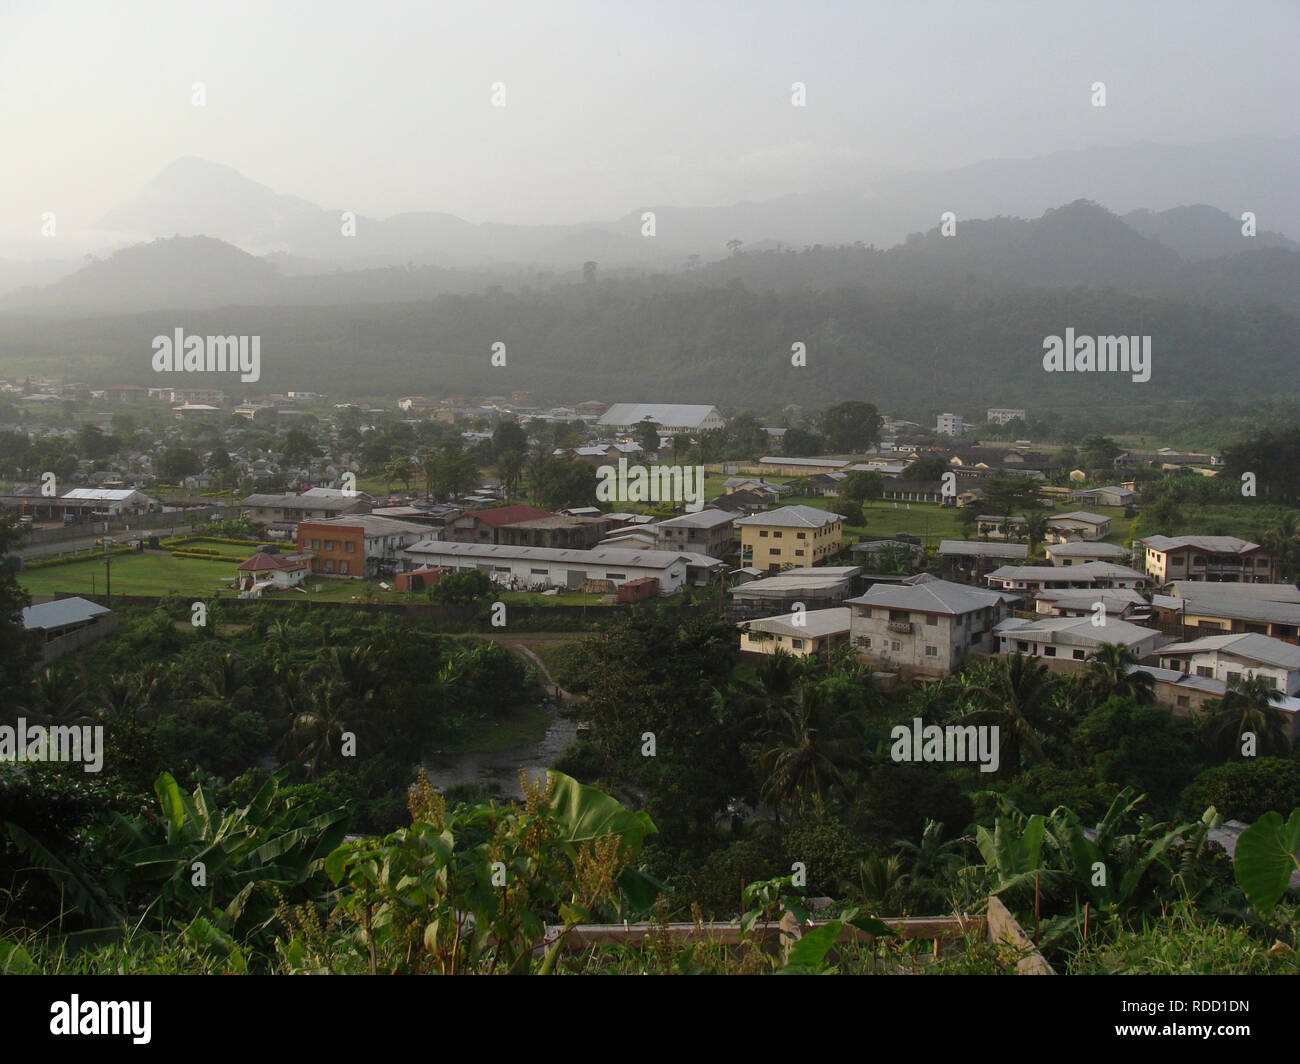 Limbe / Cameroon - November 2009: Overview on the outskirts of the city Limbe, Cameroon. Stock Photo